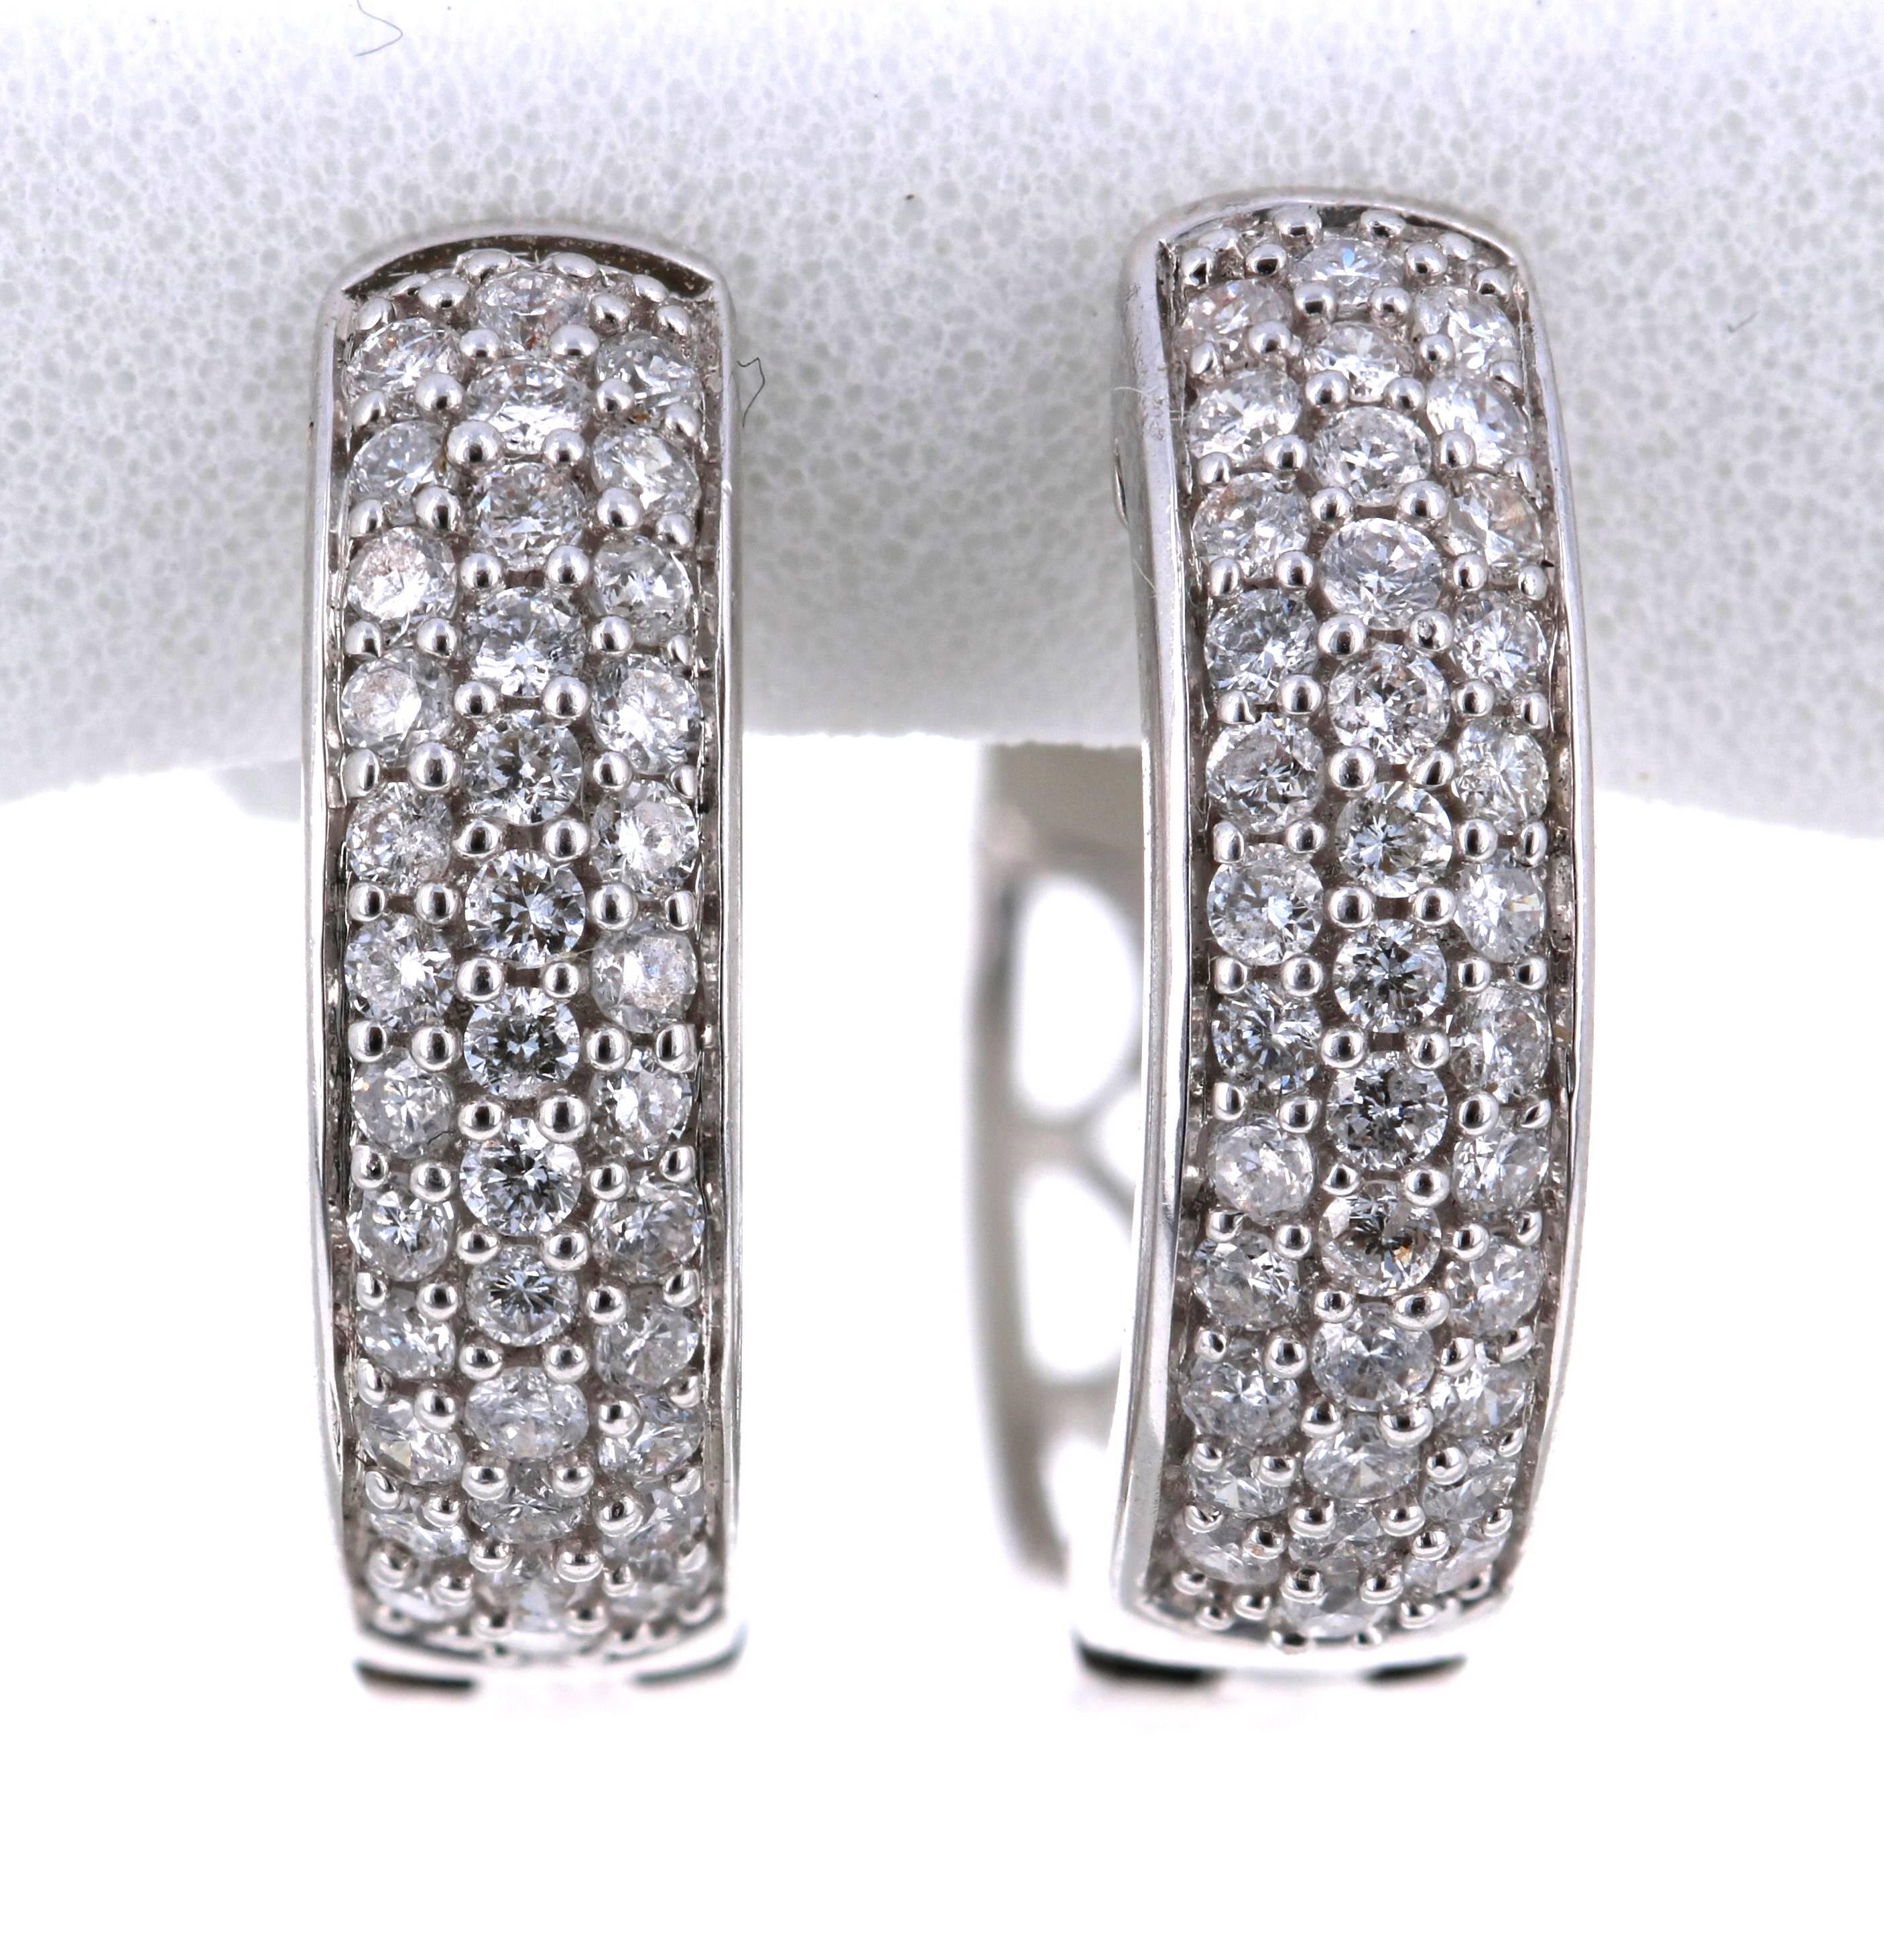 0.55 Carat Round Cut Diamond White Gold Huggy Earrings!

These cute and dainty diamond huggy-style earrings are a great addition to your everyday earring collection.  They have 74 Round Cut Diamonds that weigh 0.55 carats.  

They are made in 14K